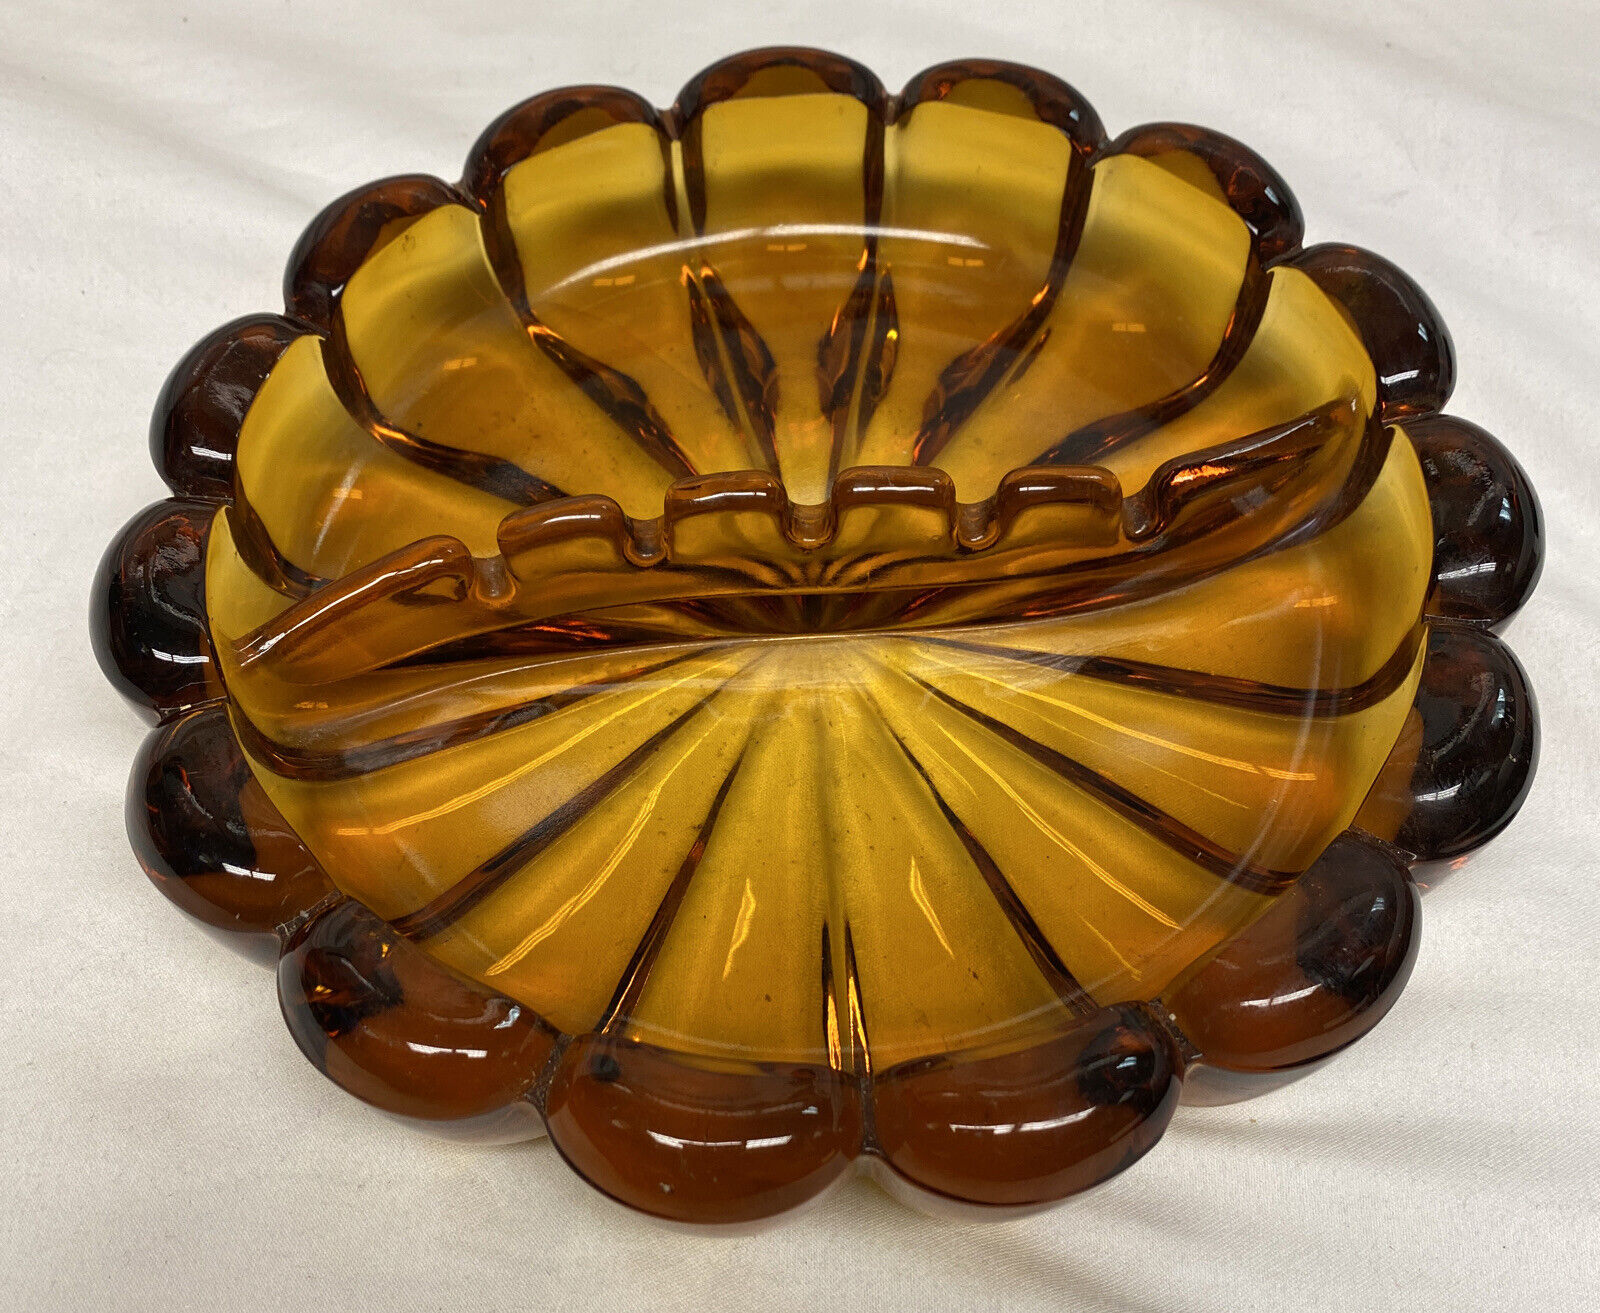 Vintage 60s 70s Amber Heavy Glass Ashtray 8” Diameter 3.5 lbs Thick